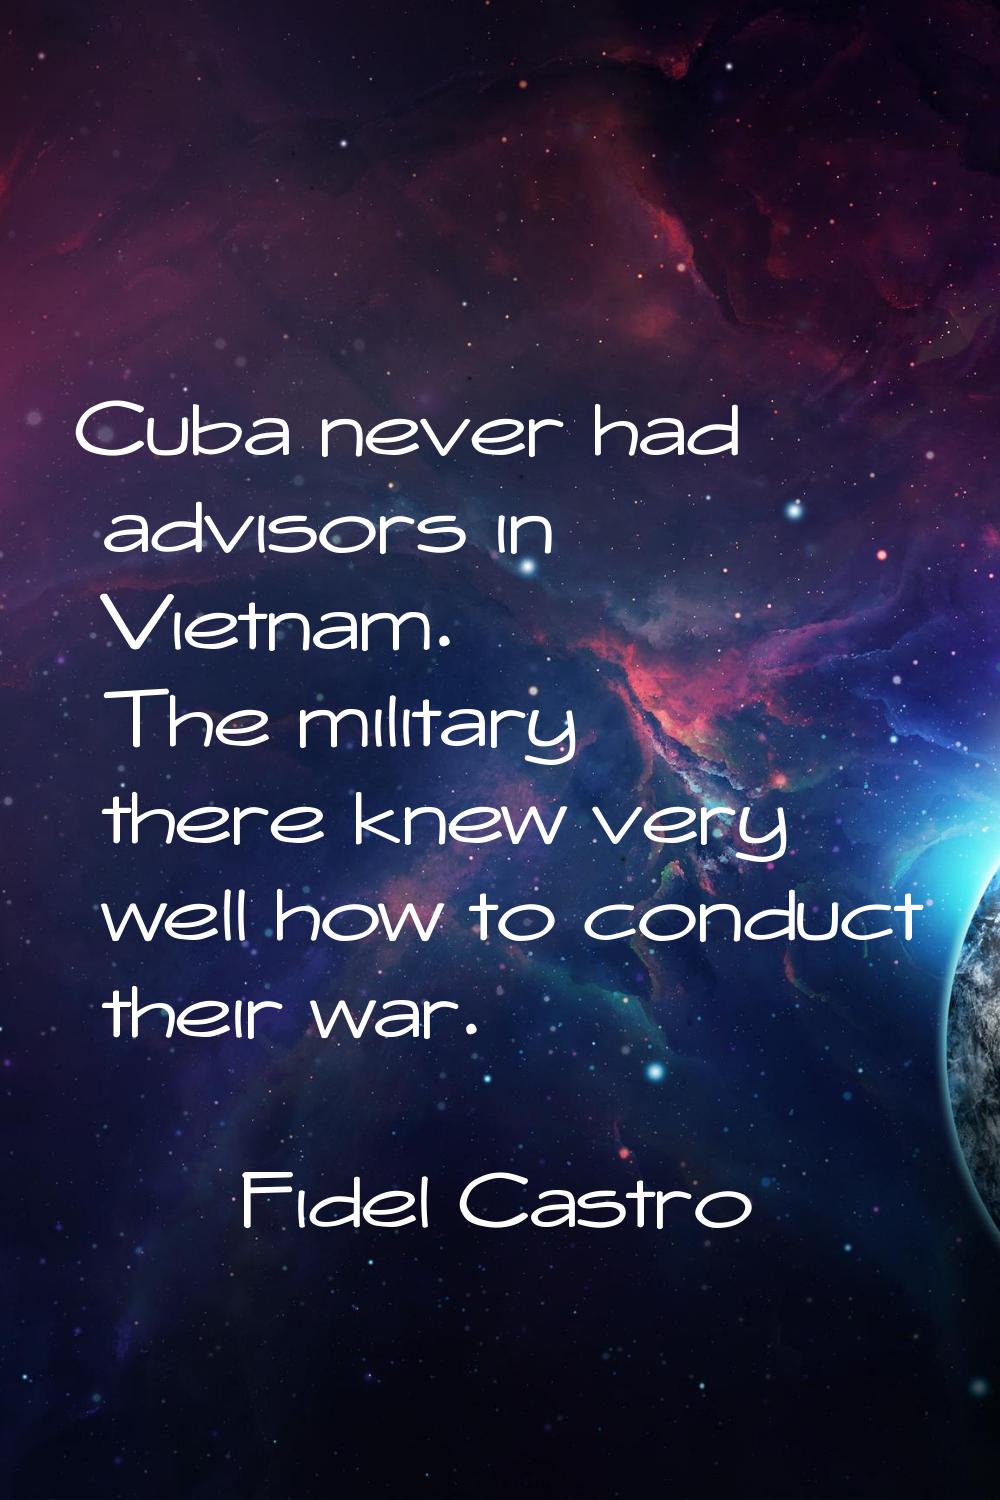 Cuba never had advisors in Vietnam. The military there knew very well how to conduct their war.